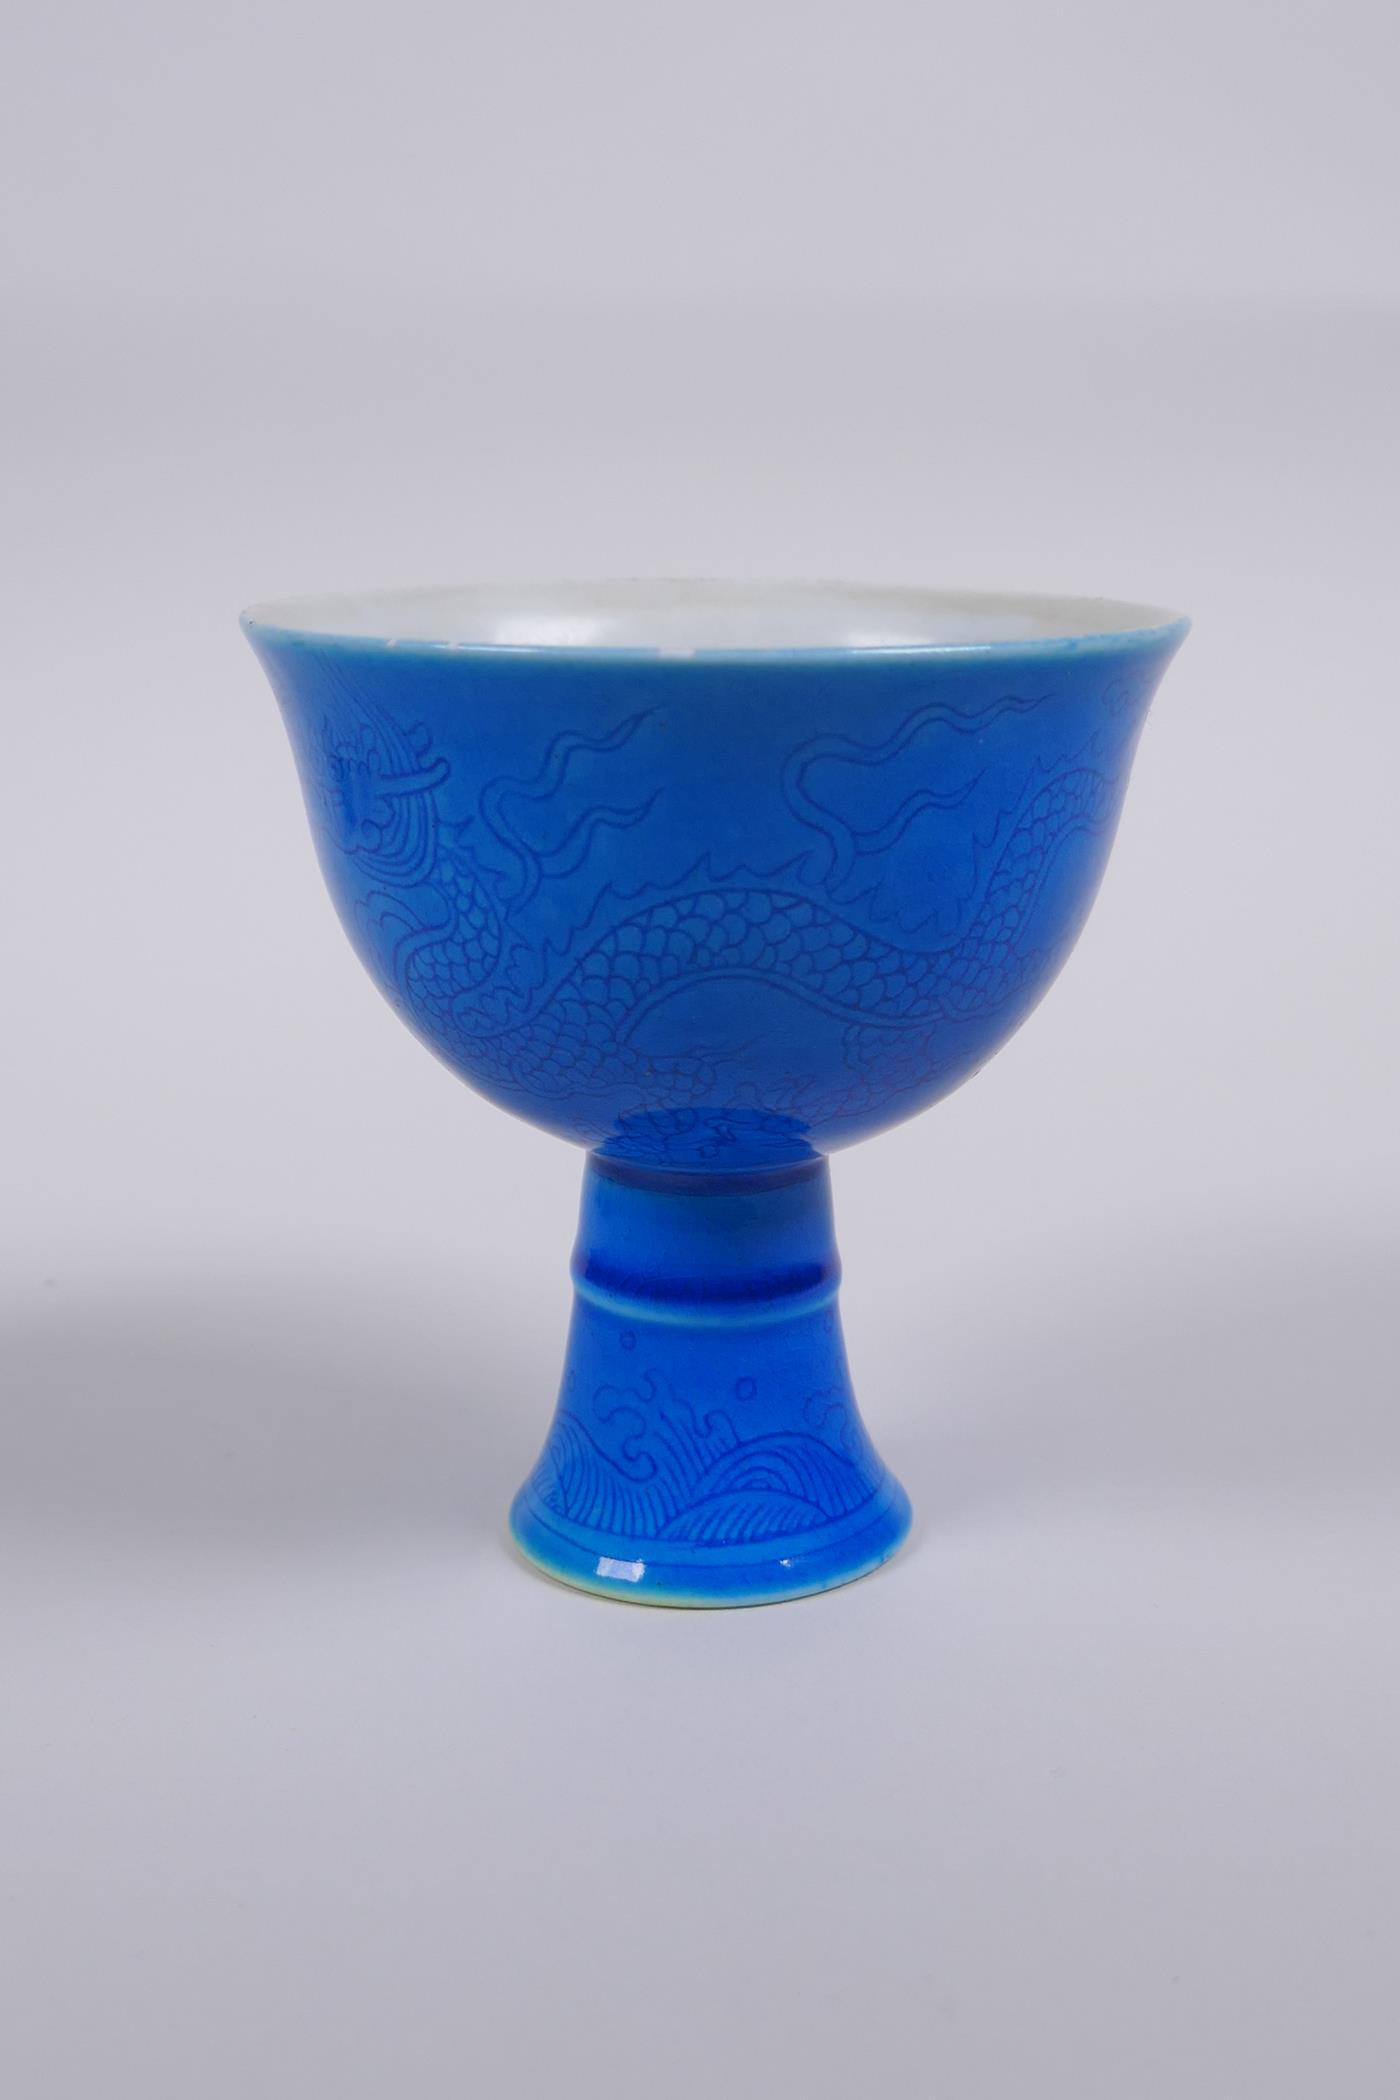 A blue glazed porcelain stem cup with incised dragon decoration, Chinese Chenghua 6 character mark - Image 3 of 4